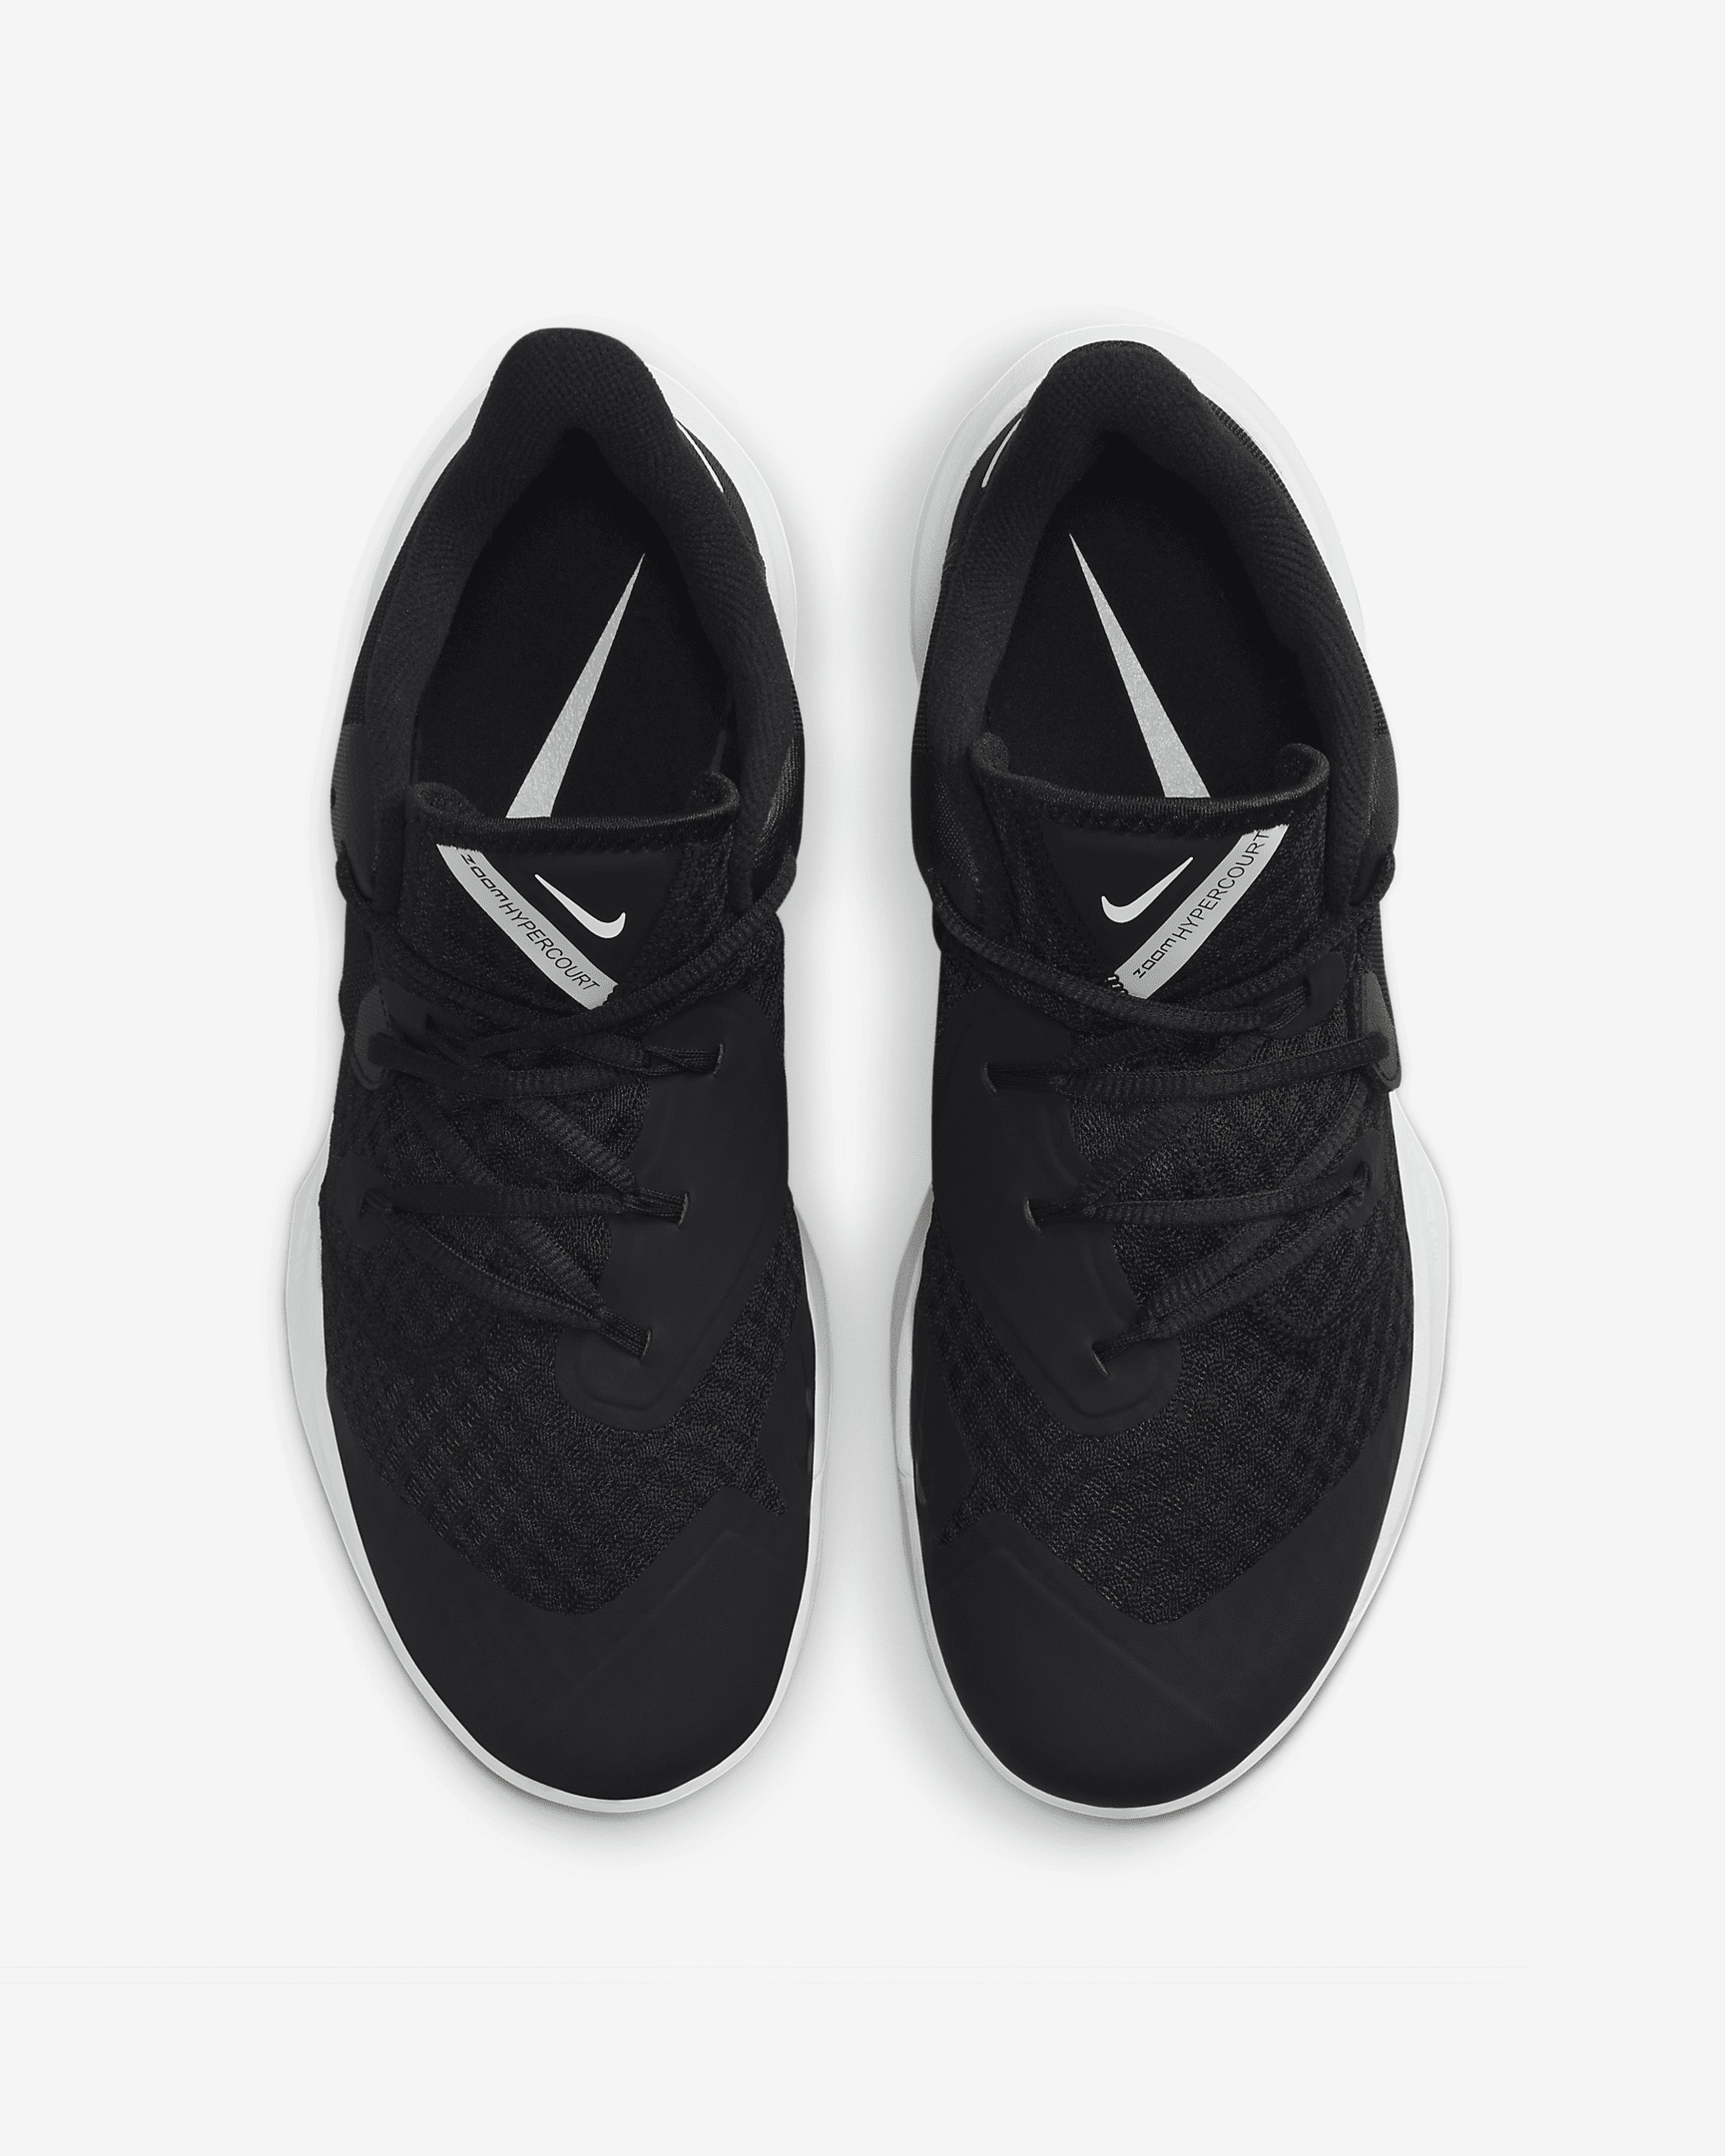 Nike HyperSpeed Court Volleyball Shoes - 4